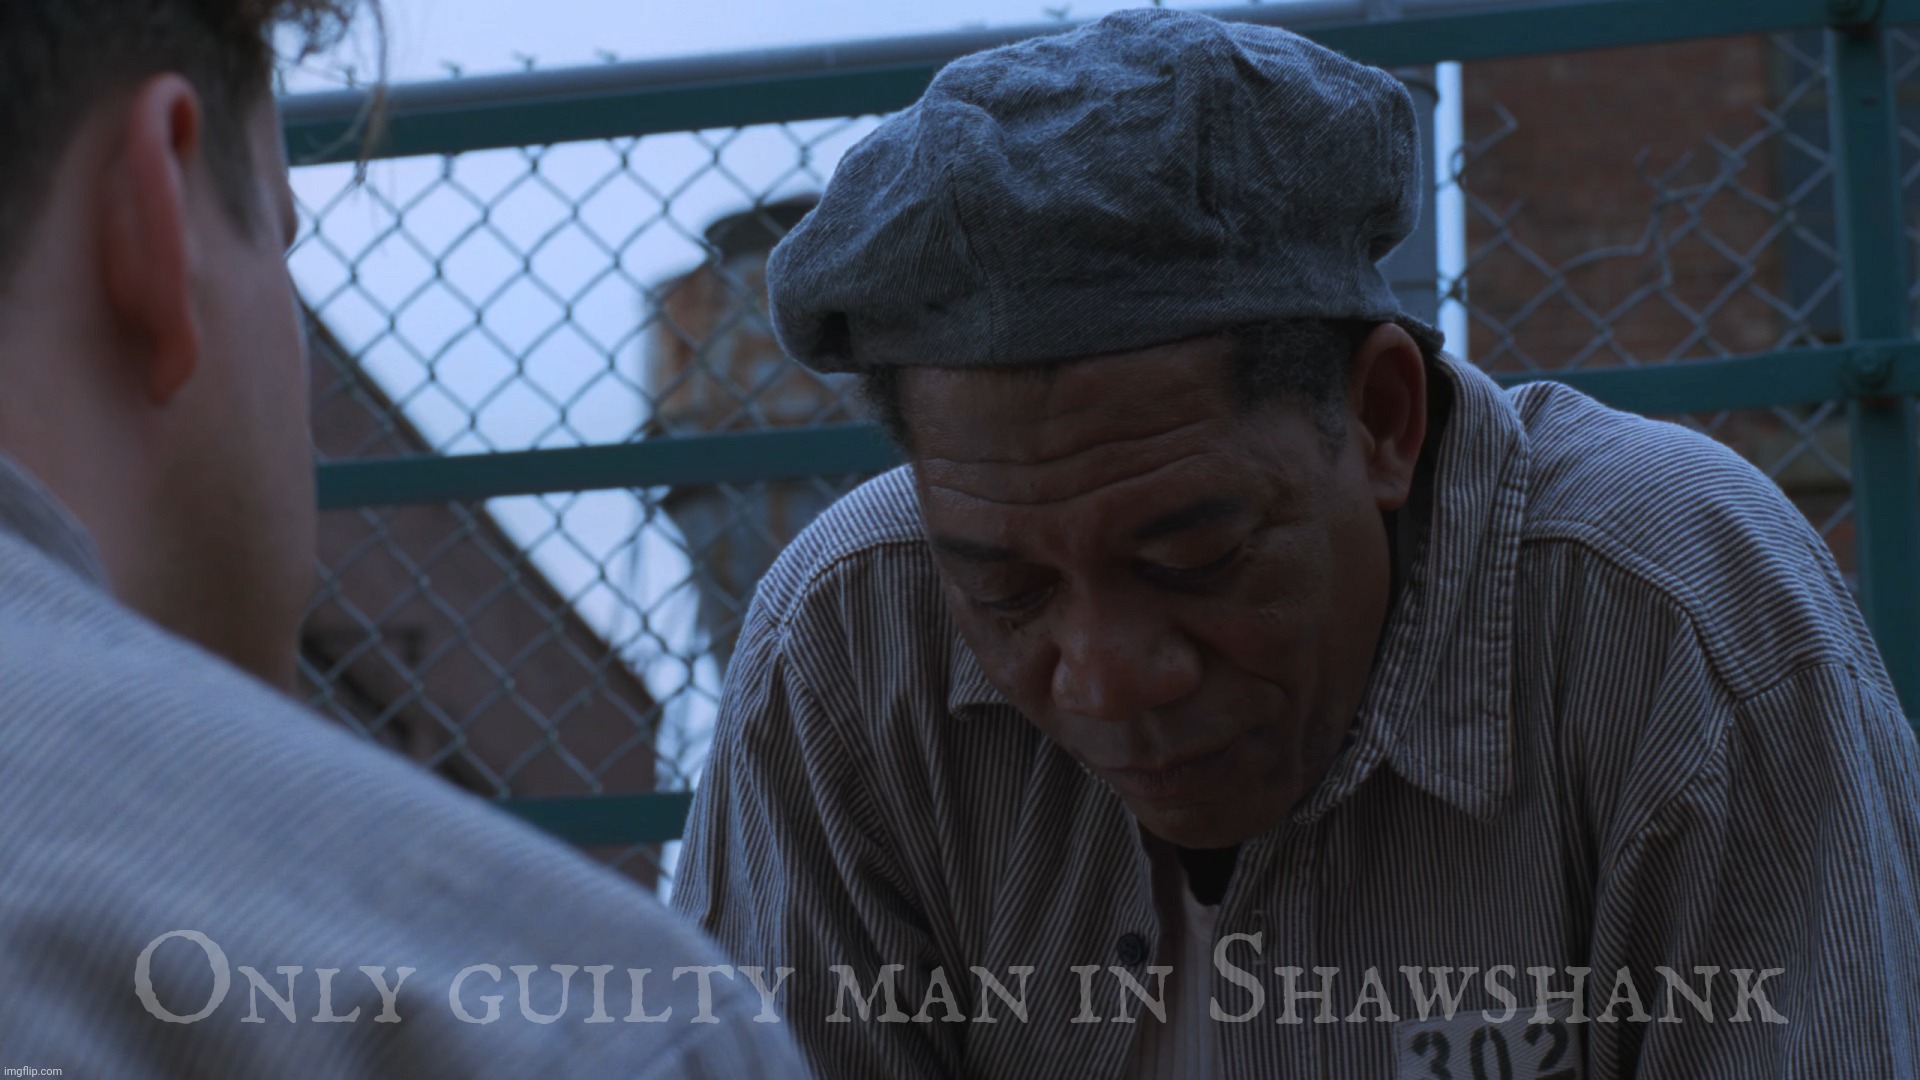 Only guilty man in Shawshank | image tagged in shawshank,only guilty man in shawshank | made w/ Imgflip meme maker